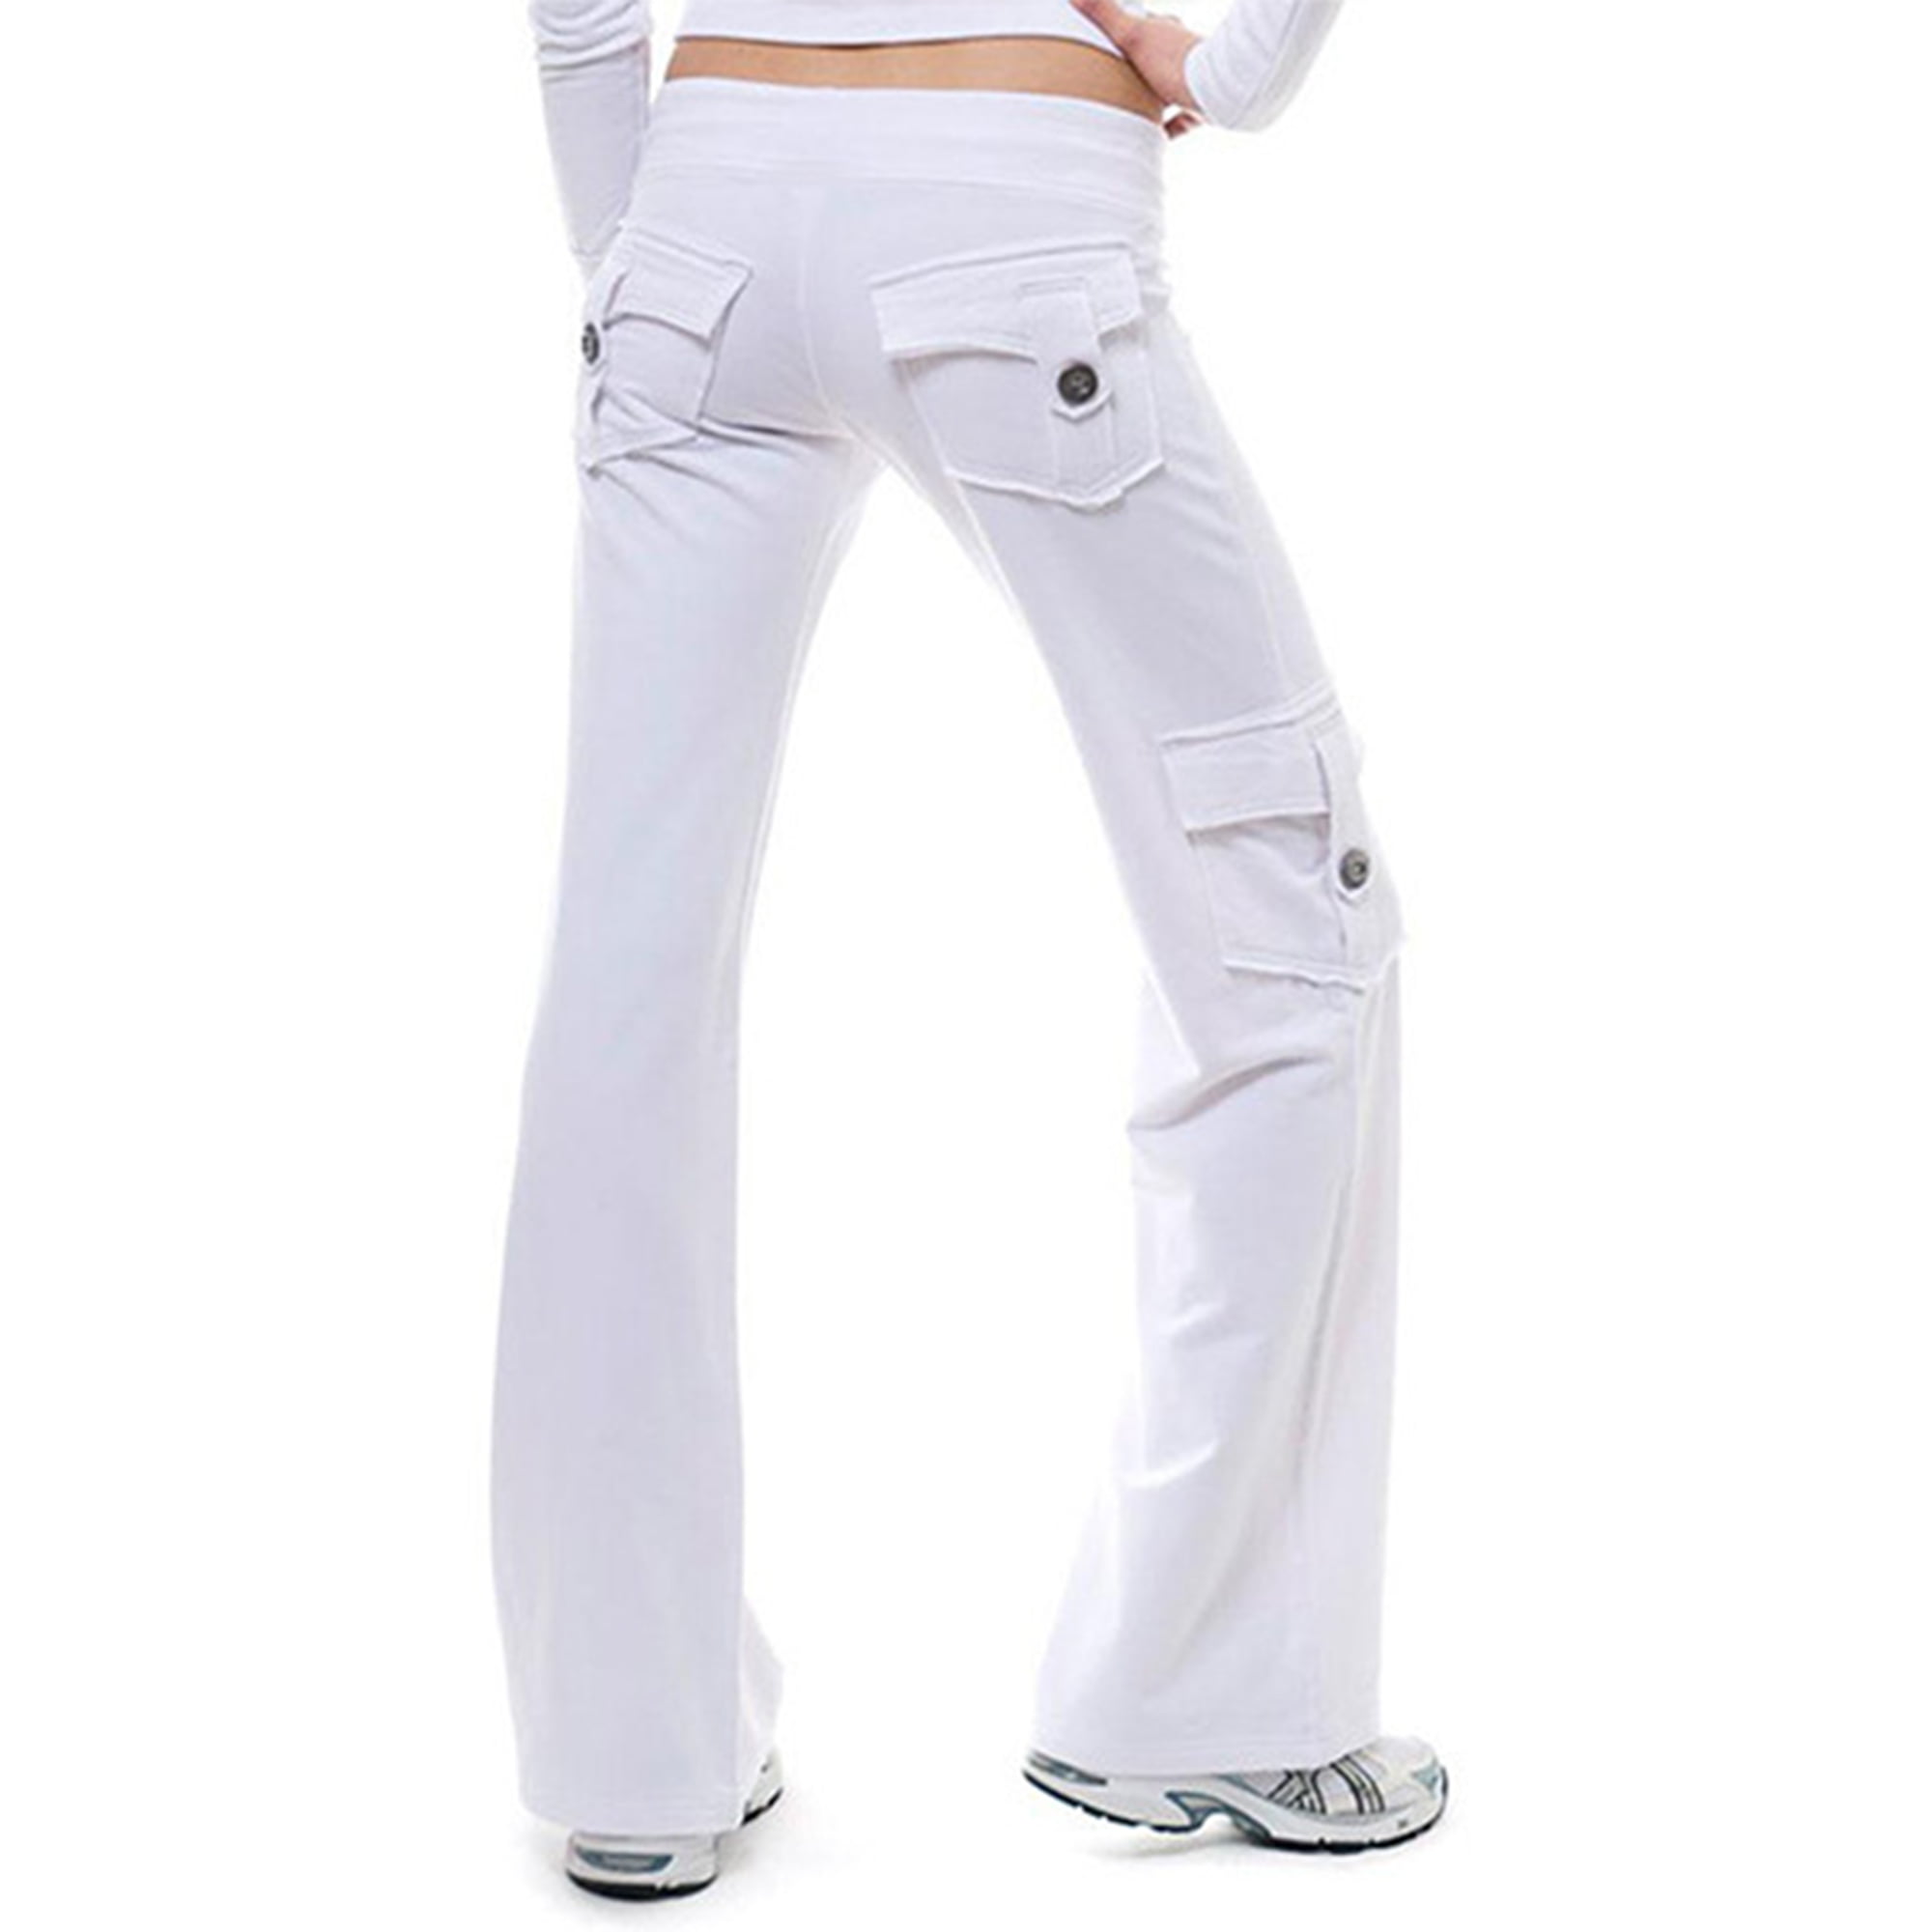 Softmallow Women's High Waist Wide Leg Jogger Trouser Plus Size Flare Sweat  Pant with Pocket White S 